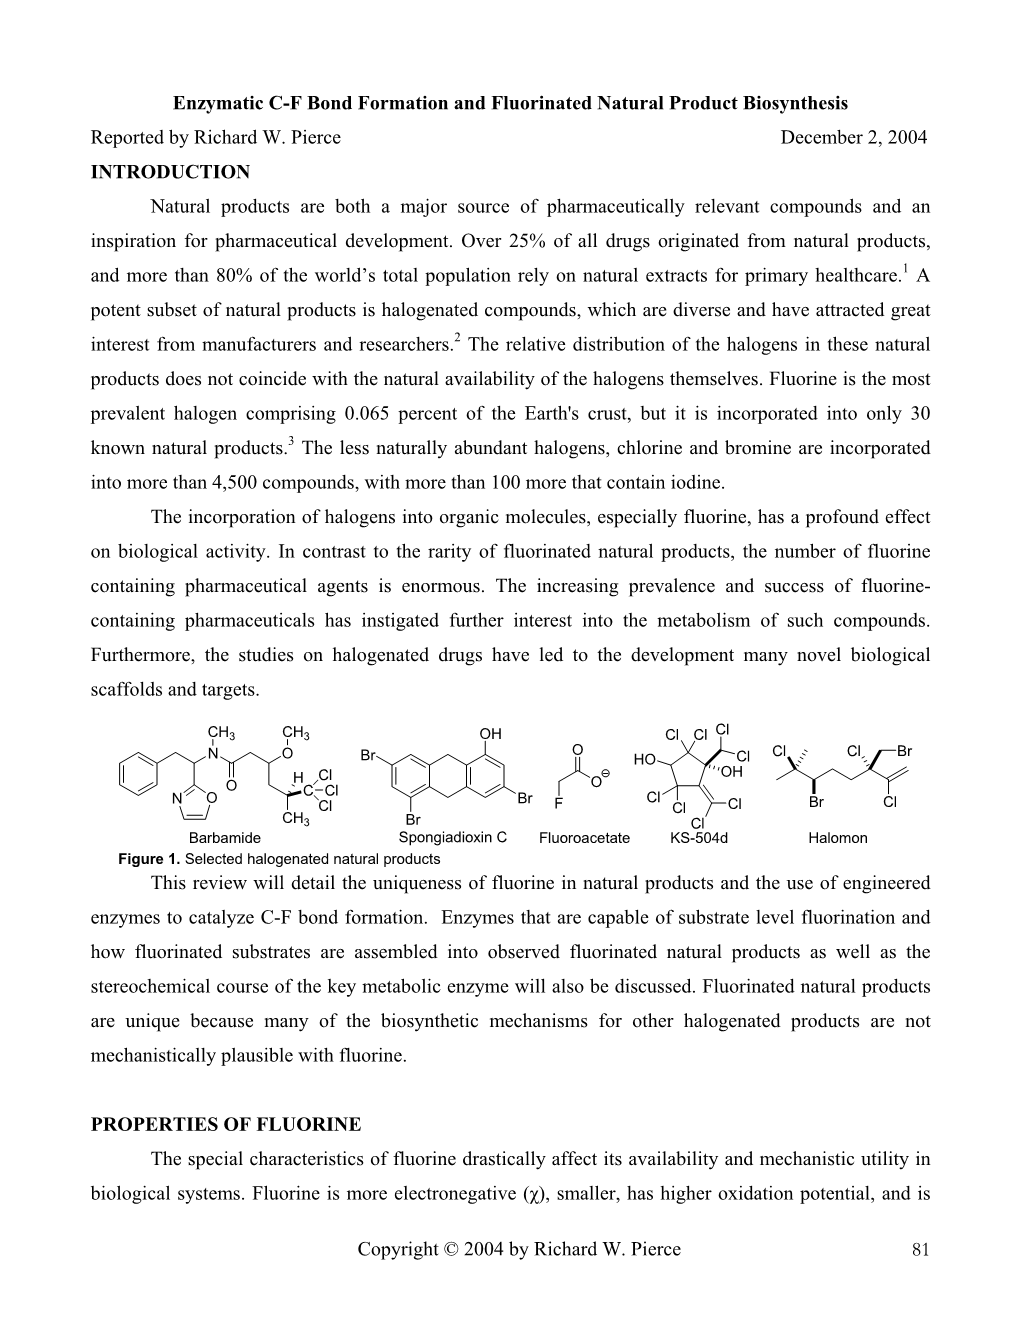 Enzymatic C-F Bond Formation and Fluorinated Natural Product Biosynthesis Reported by Richard W